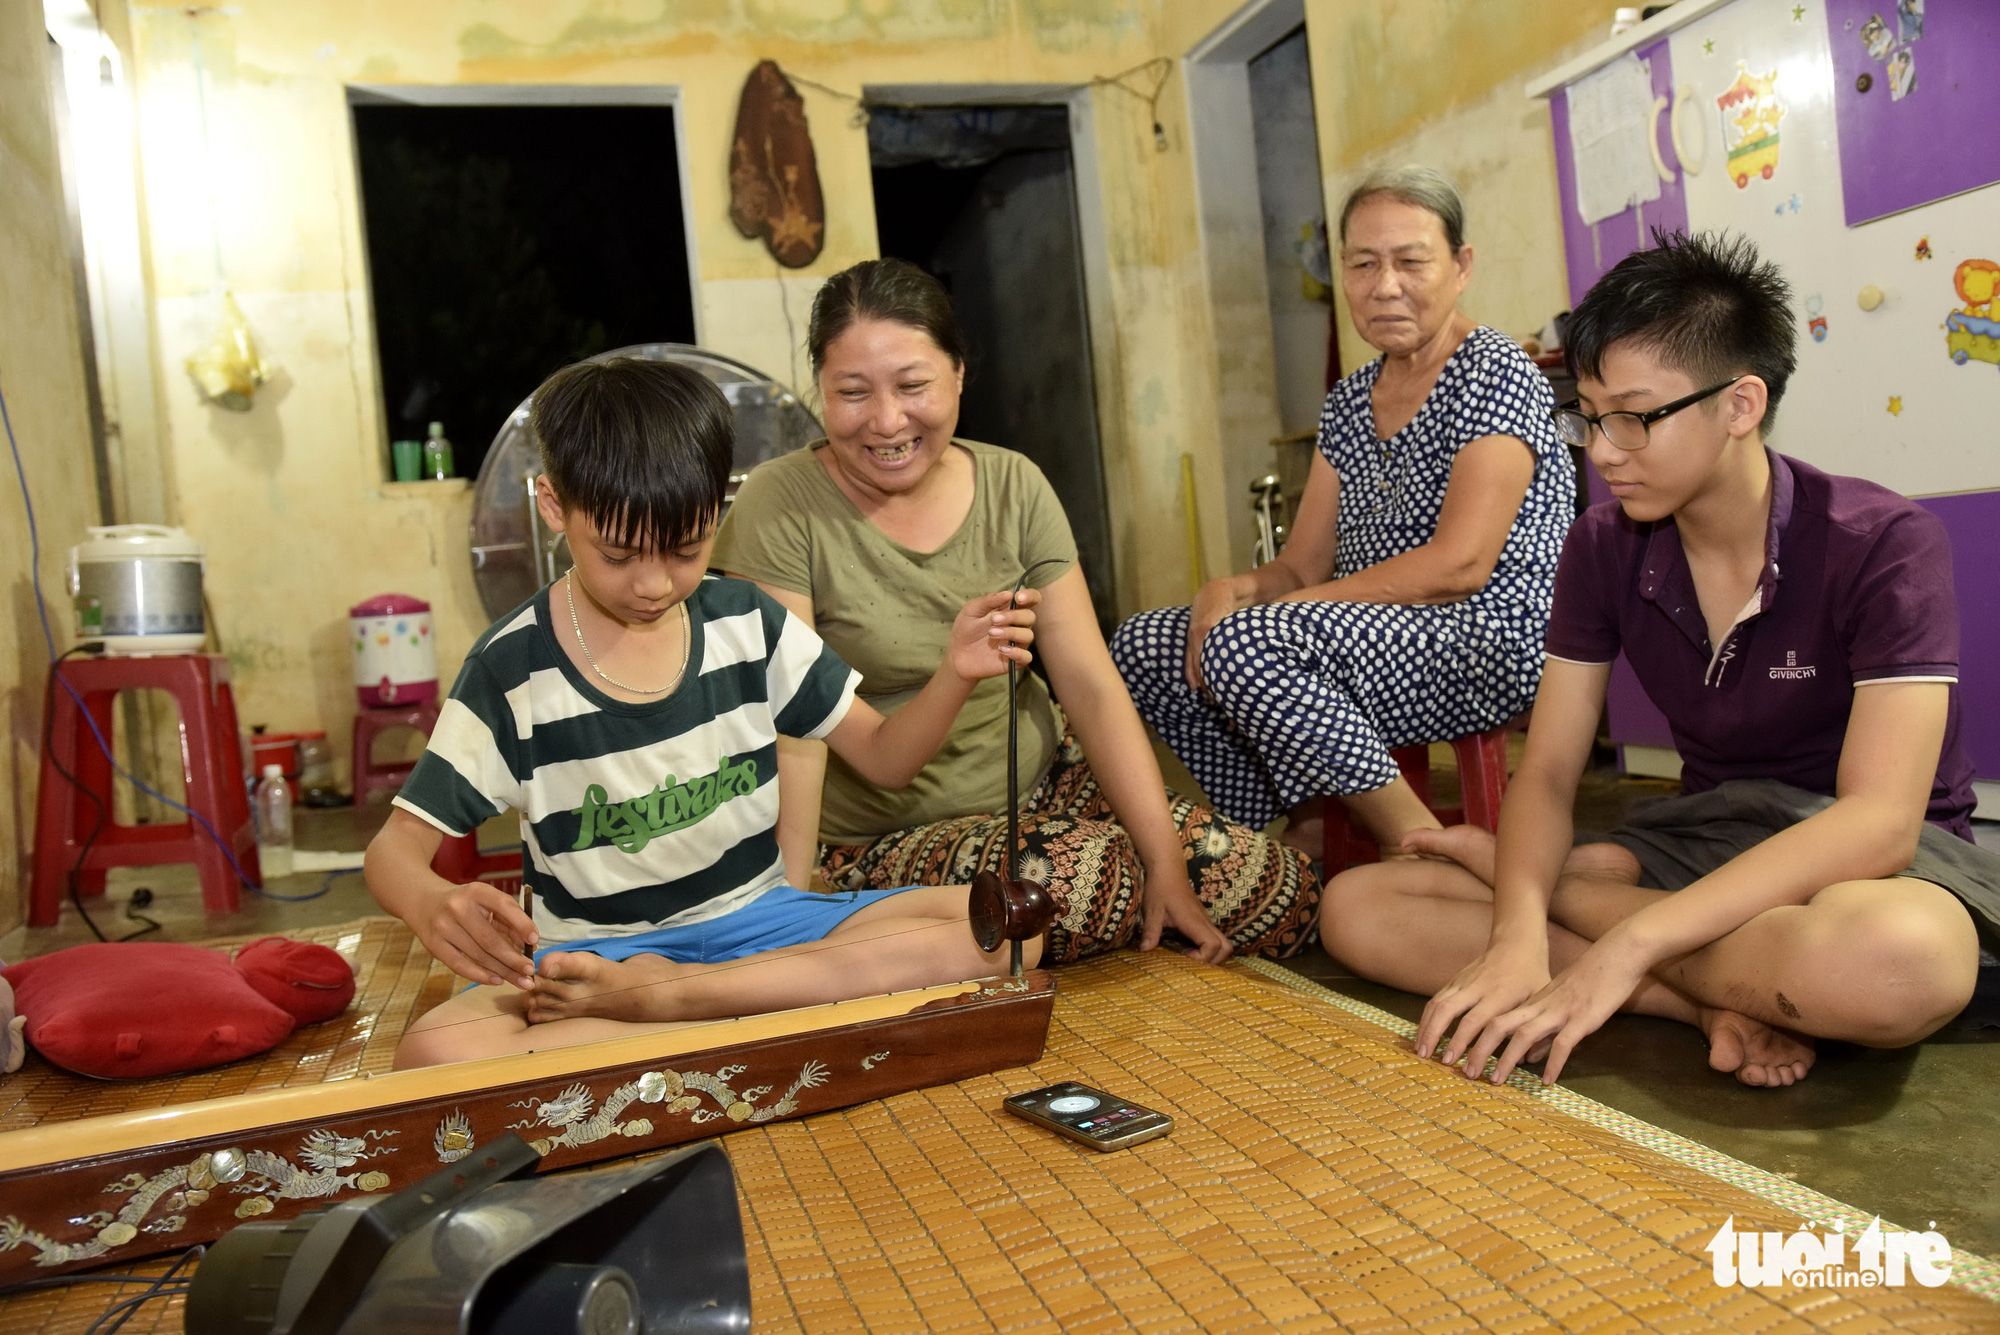 In Vietnam, elderly woman, daughter peddle to support grandson’s pursuit of traditional music